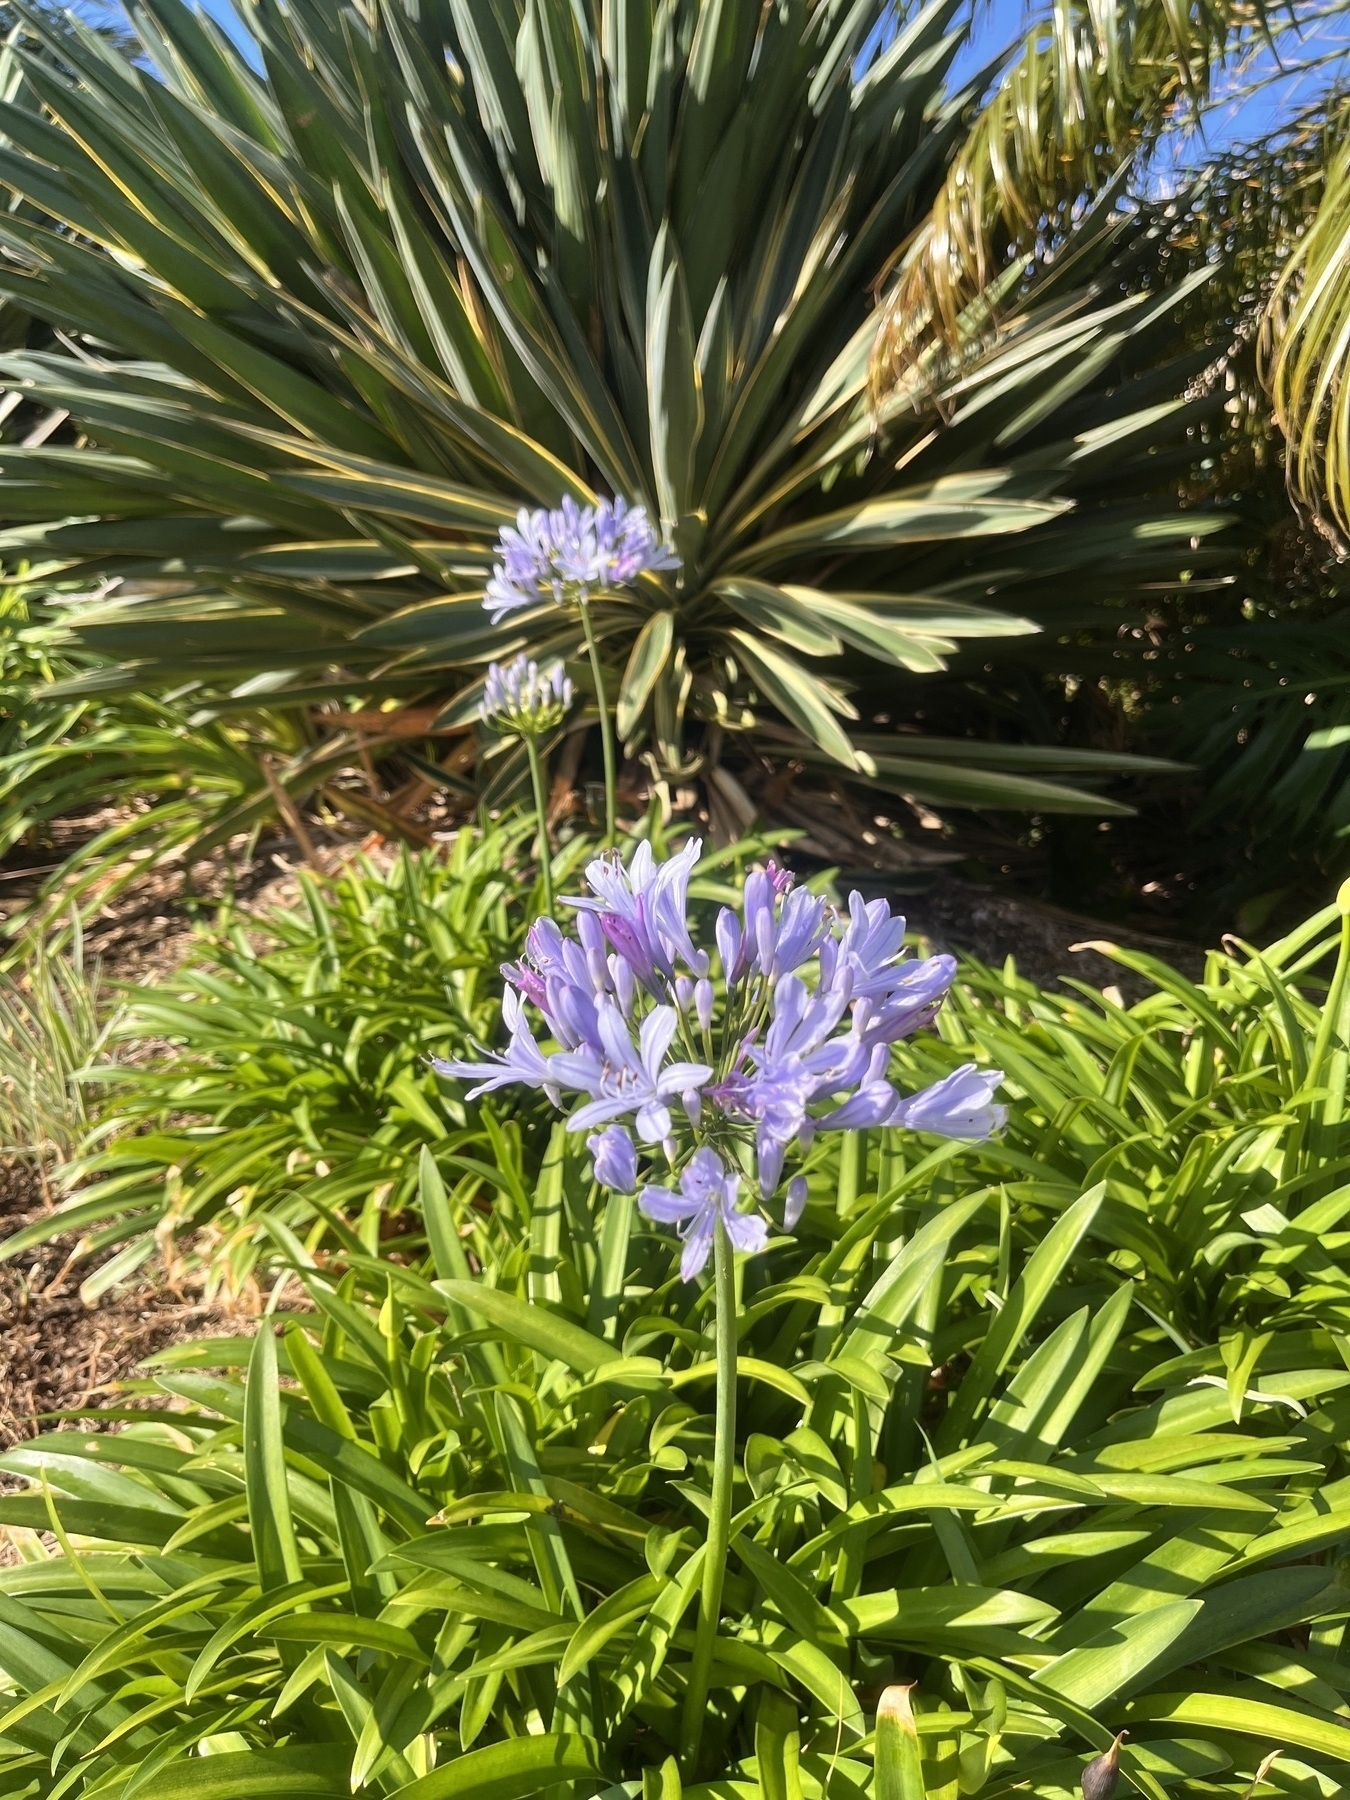 Light purple agapanthus flowering in the garden surrounded by other vegetation.